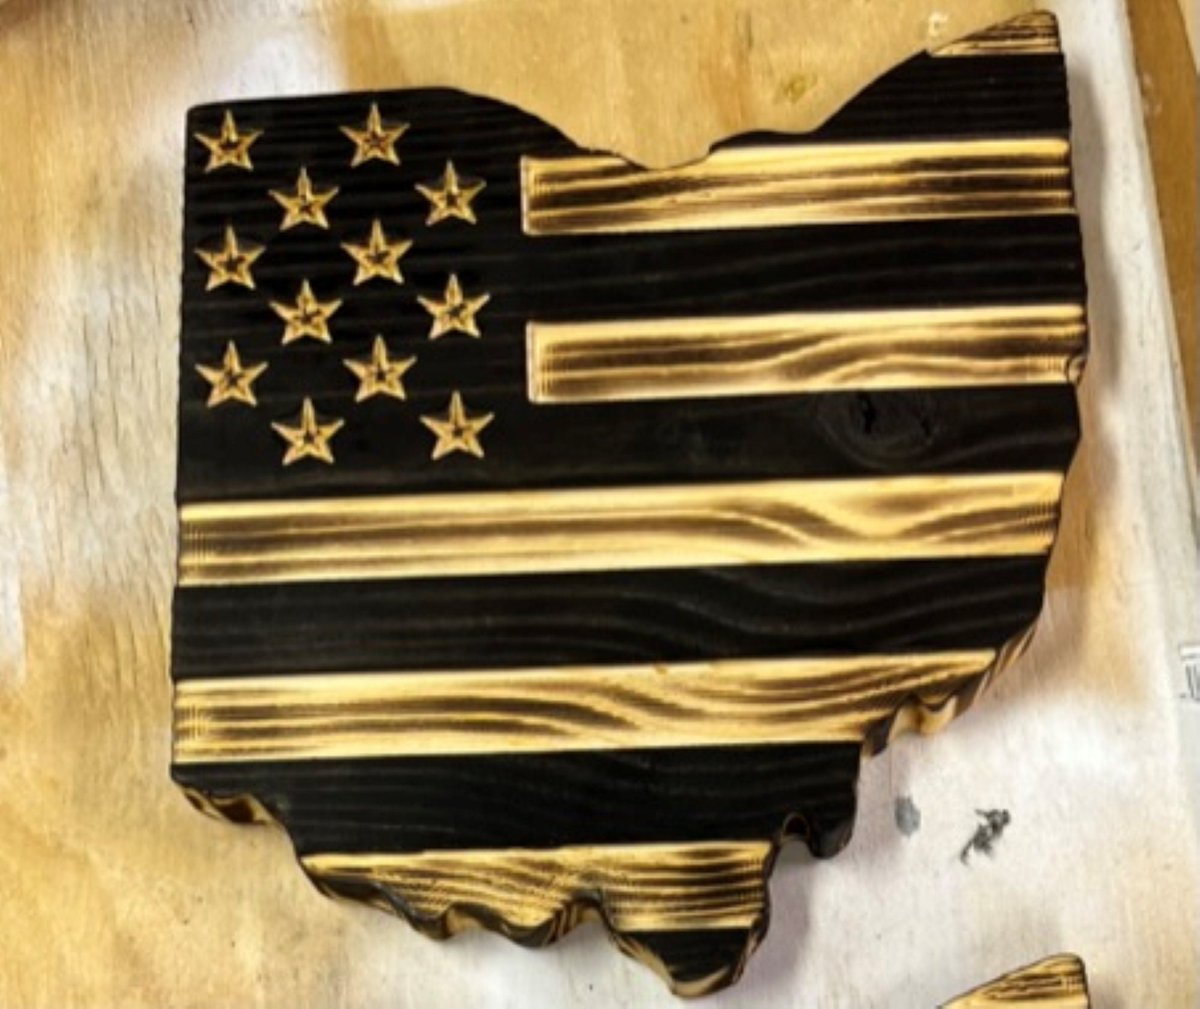 Excited to share the latest addition to my #etsy shop: Customized Rustic State Shaped American Flag Customizable to your state **FREE SHIPPING** etsy.me/46SxEhK #black #wood #woodflag #woodamericanflag #woodenflag #burntwoodart #rusticamericanflag #woodenameric